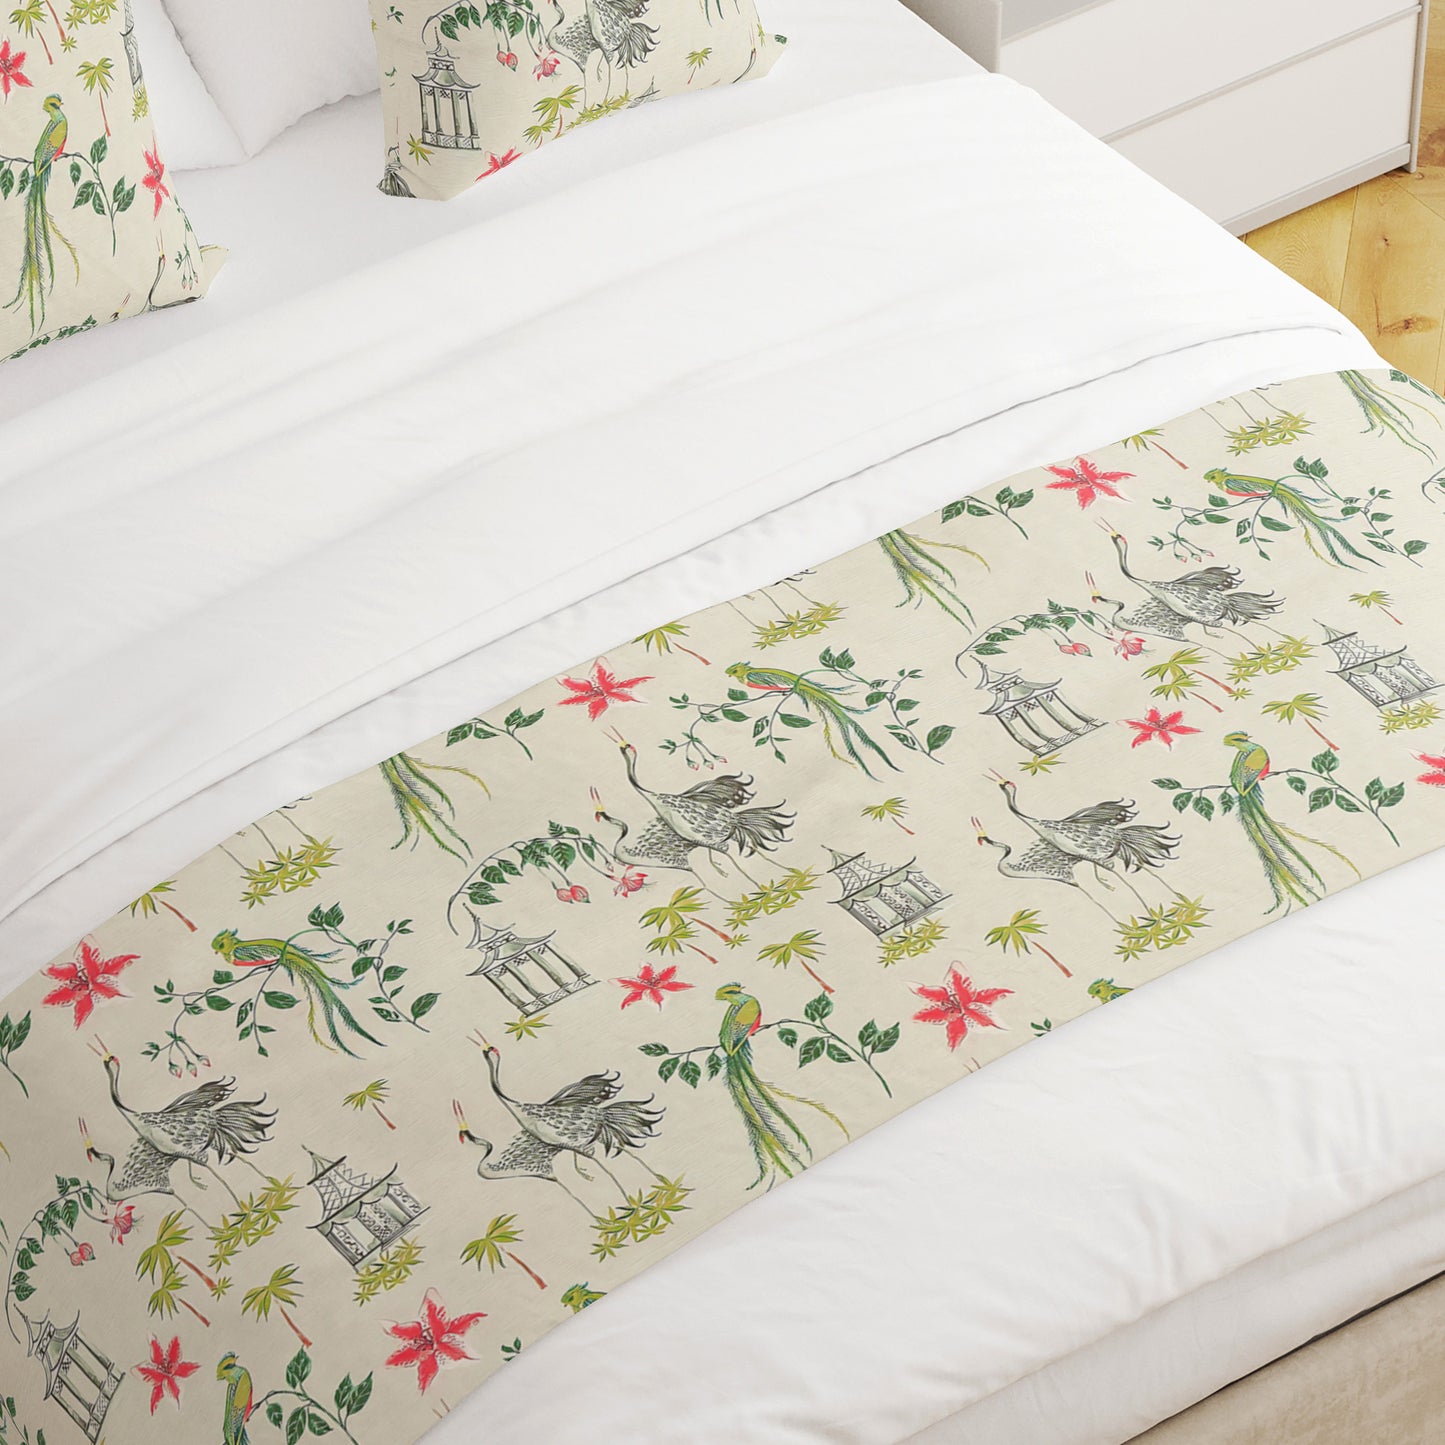 Bed Runner in Let It Crane Avocado Oriental Toile, Multicolor Chinoiserie